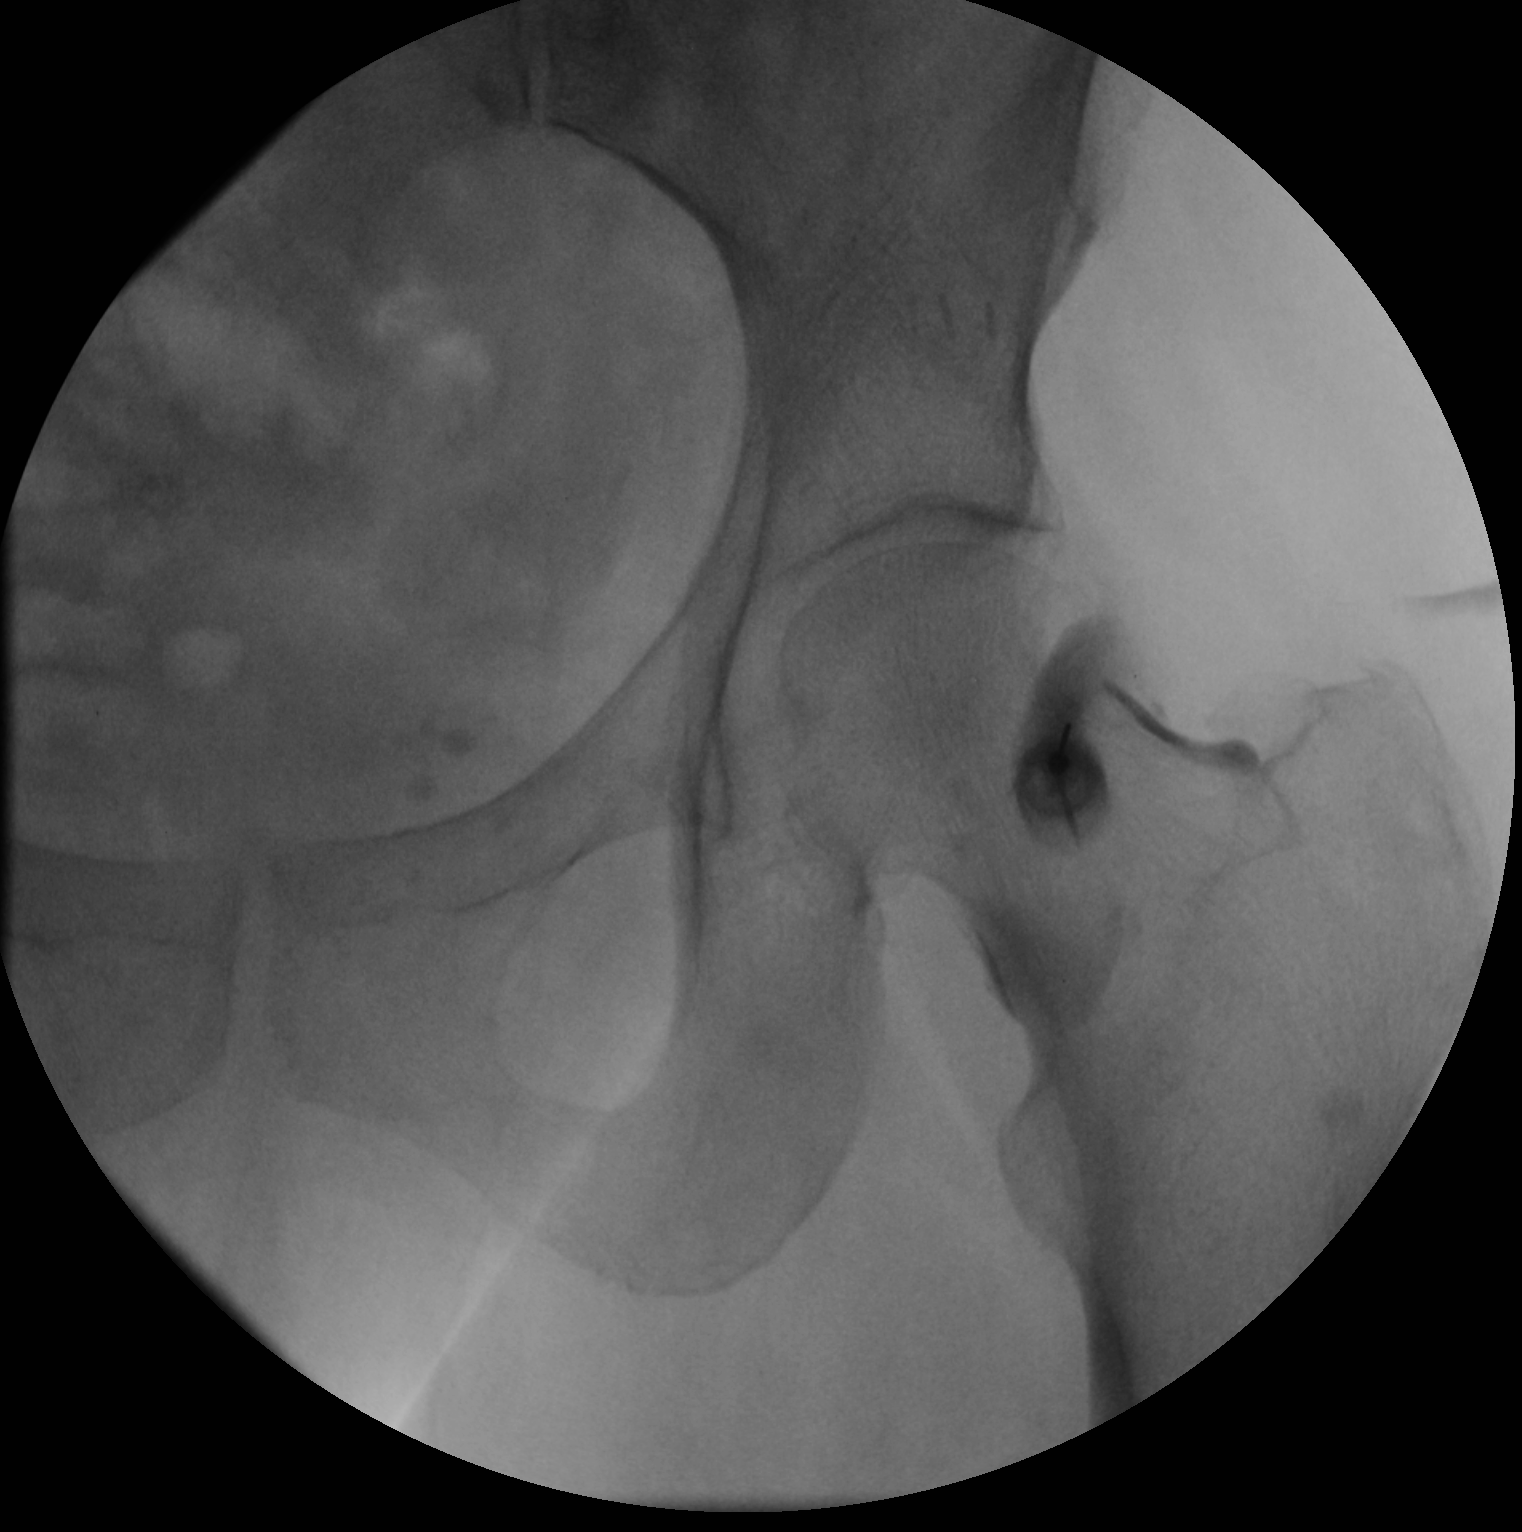 A small amount of iodinated contrast is injected into the femoroacetabular joint to ensure appropriate needle entry into the joint space